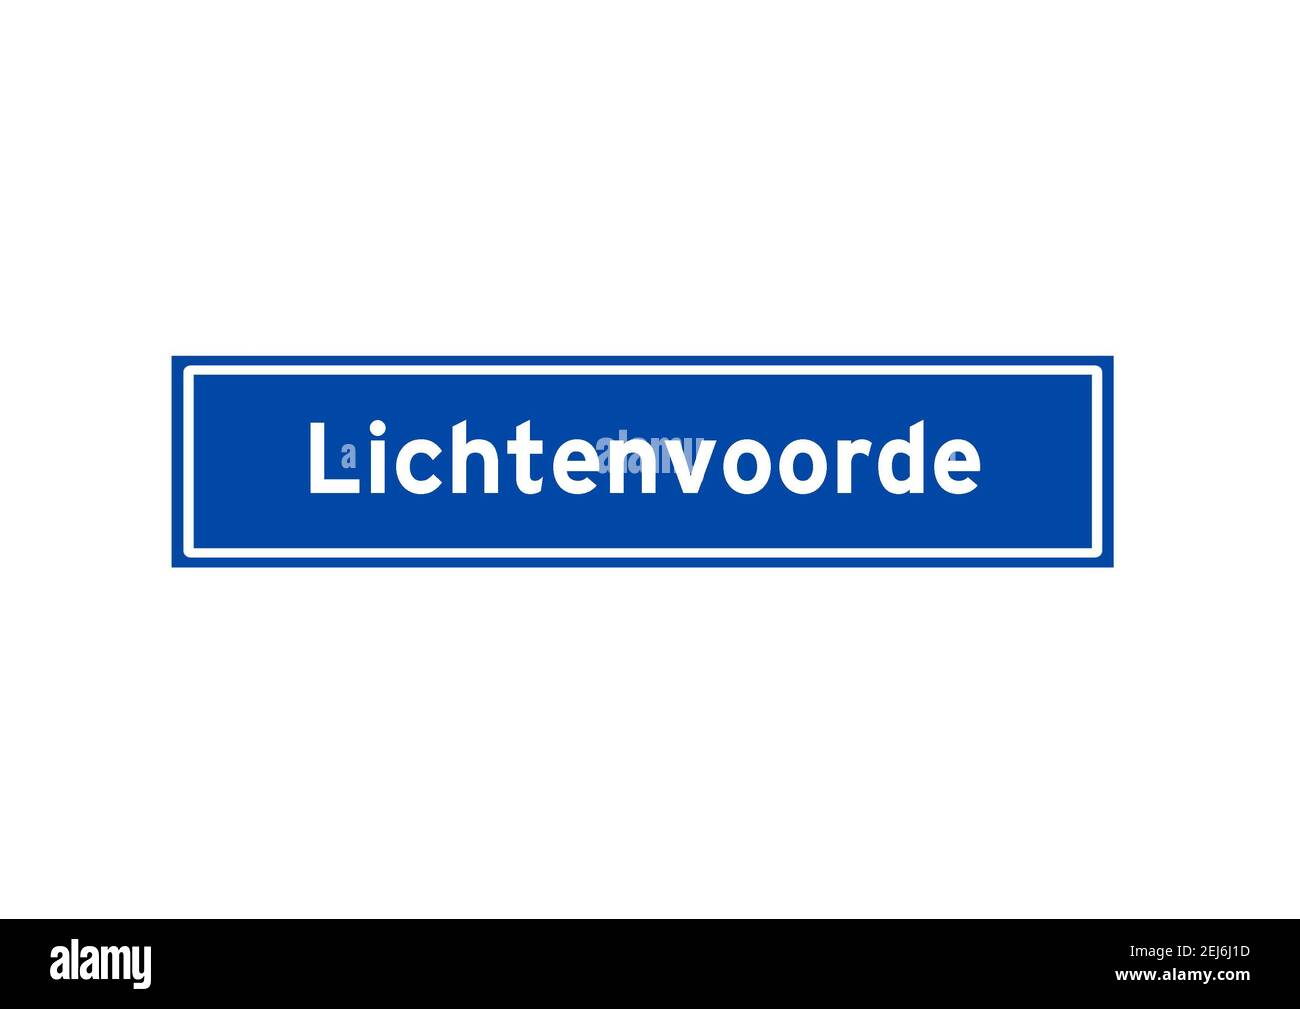 Lichtenvoorde isolated Dutch place name sign. City sign from the Netherlands. Stock Photo